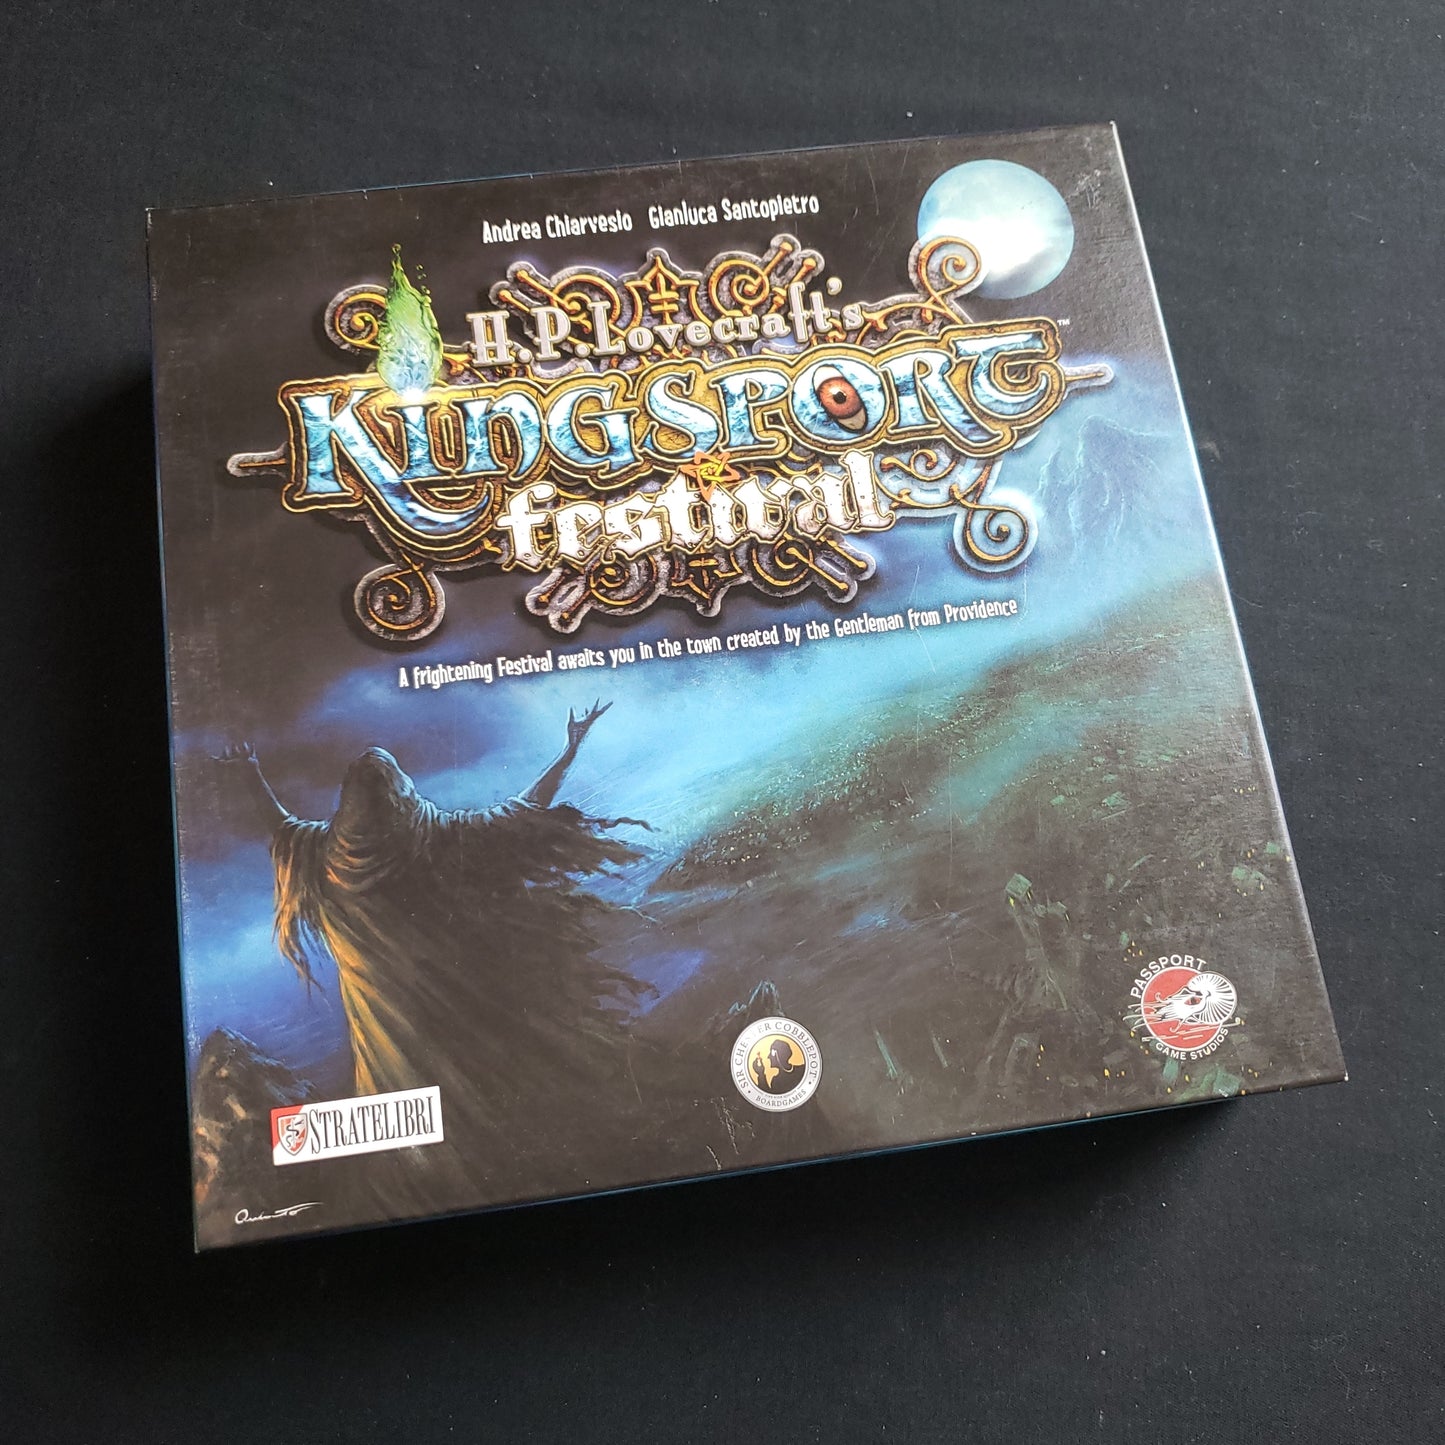 Image shows the front cover of the box of the Kingsport Festival board game